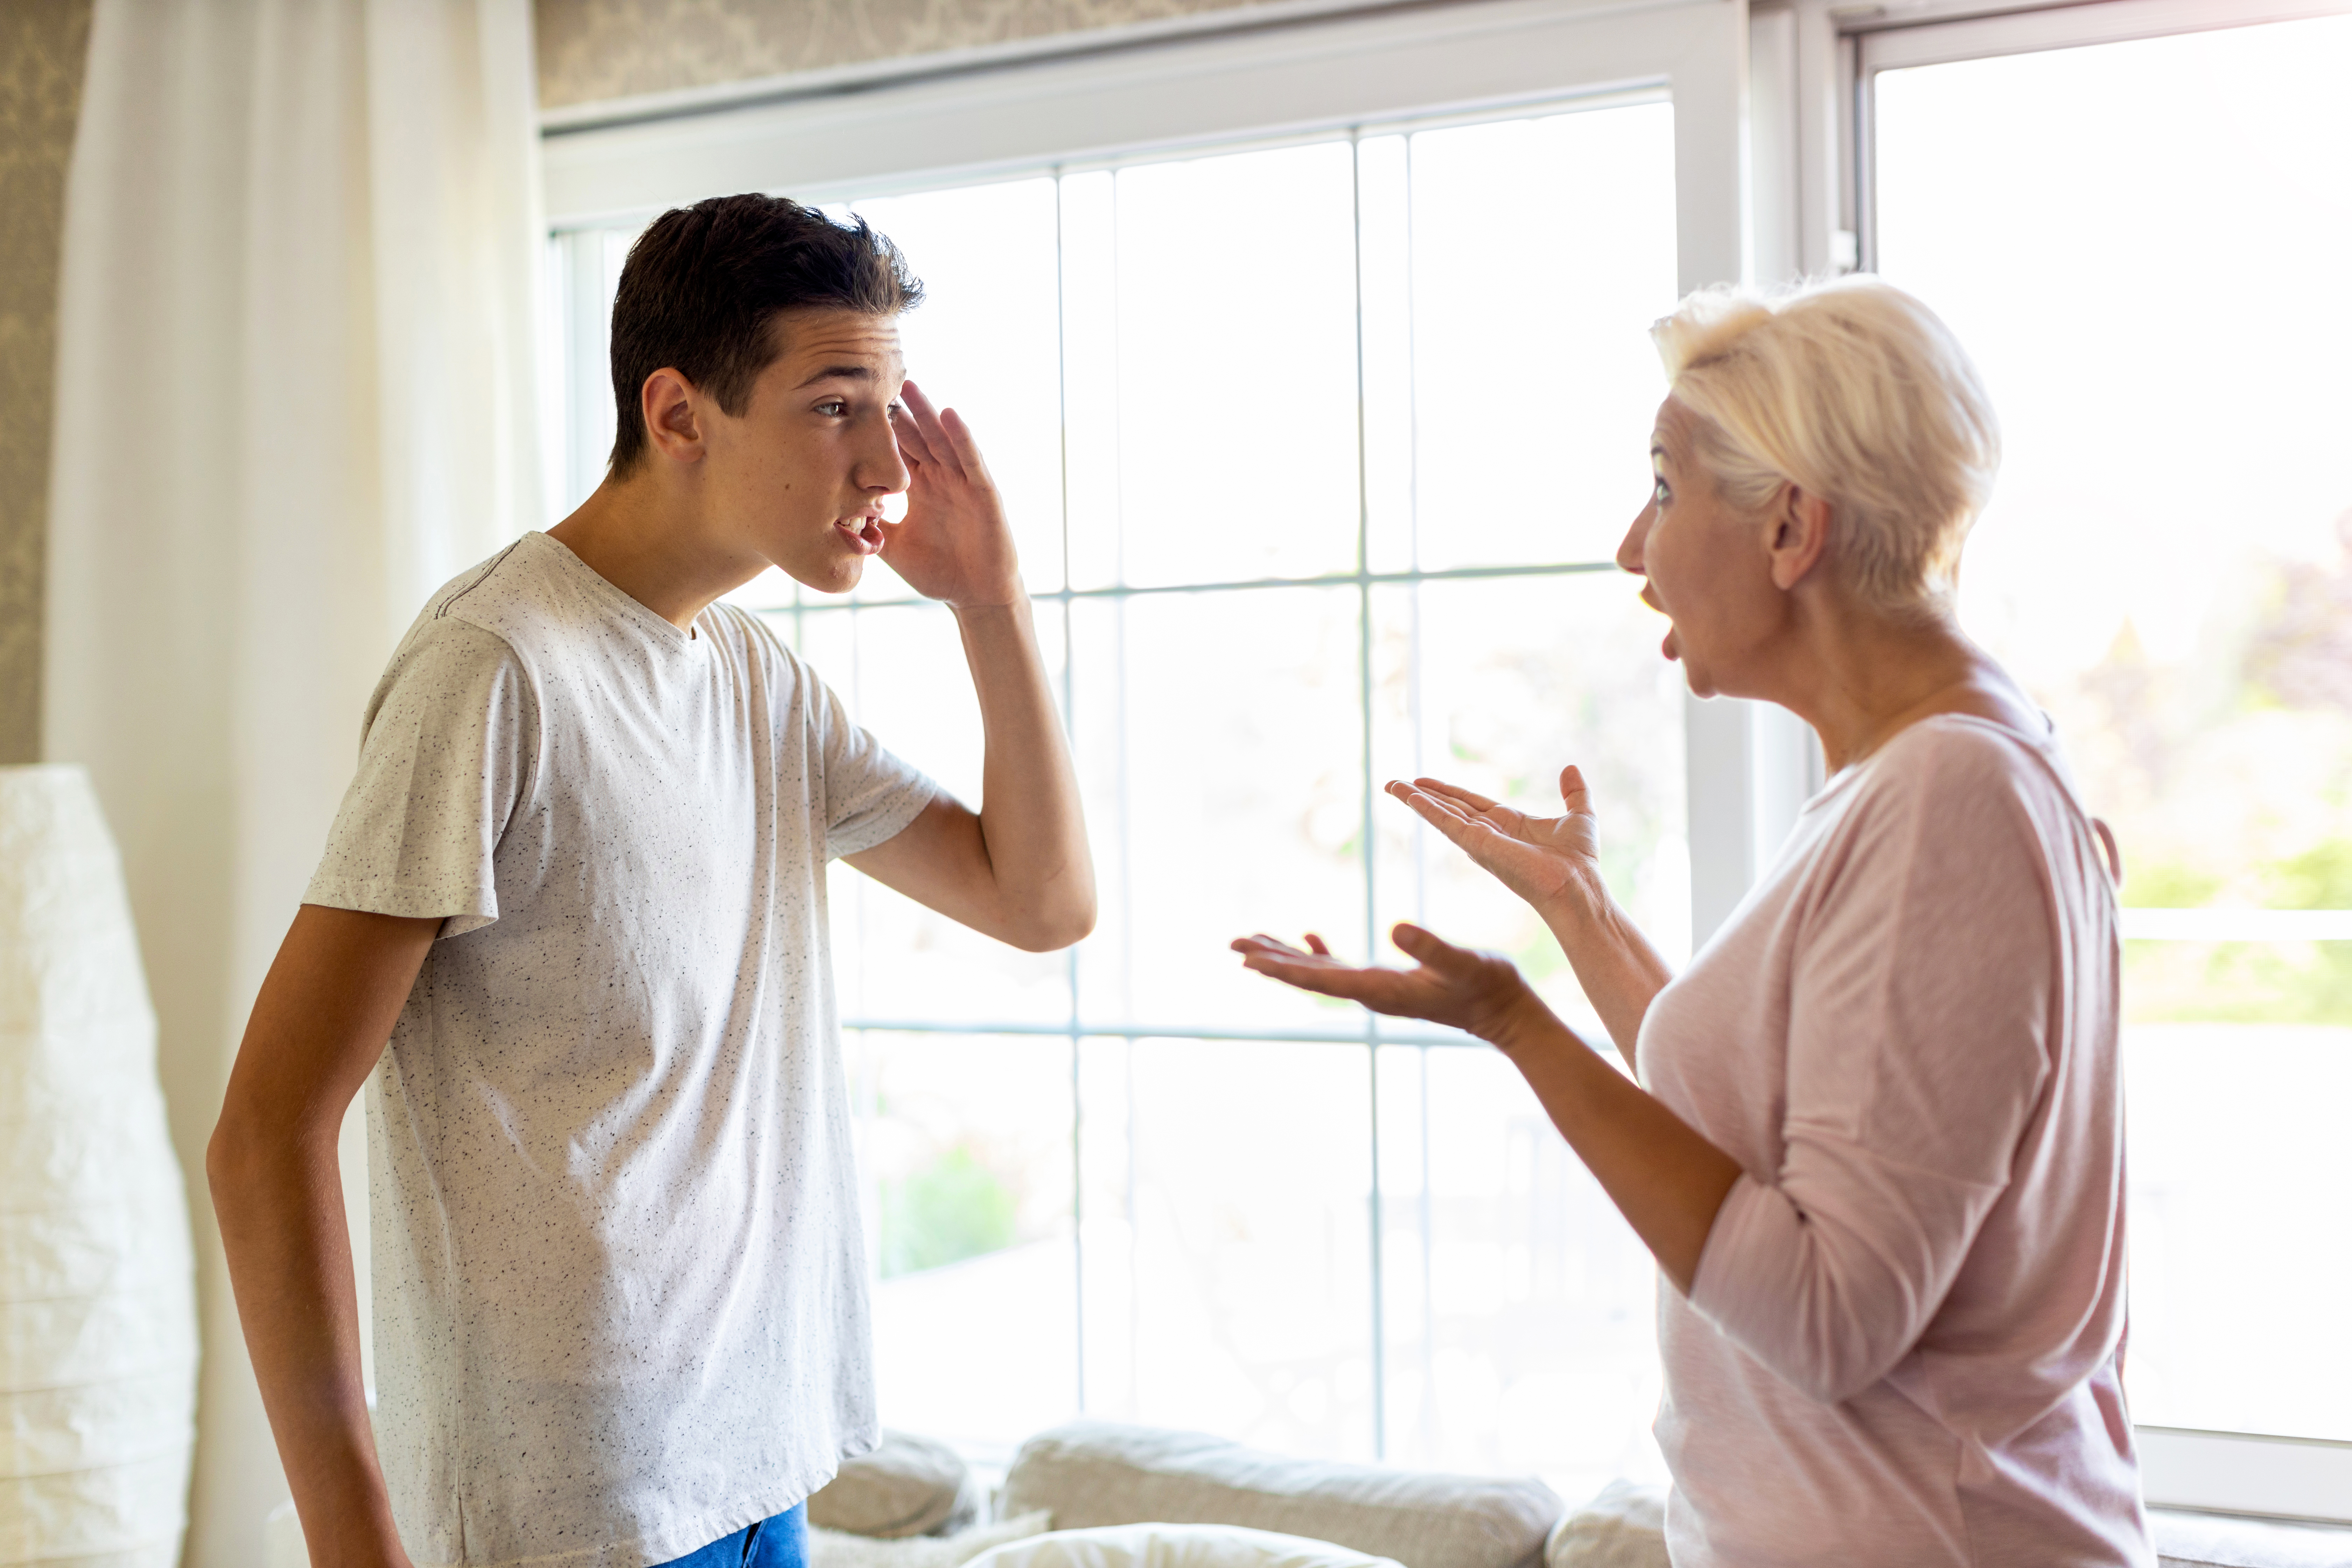 A woman and her teenage son yelling at each other | Source: Getty Images